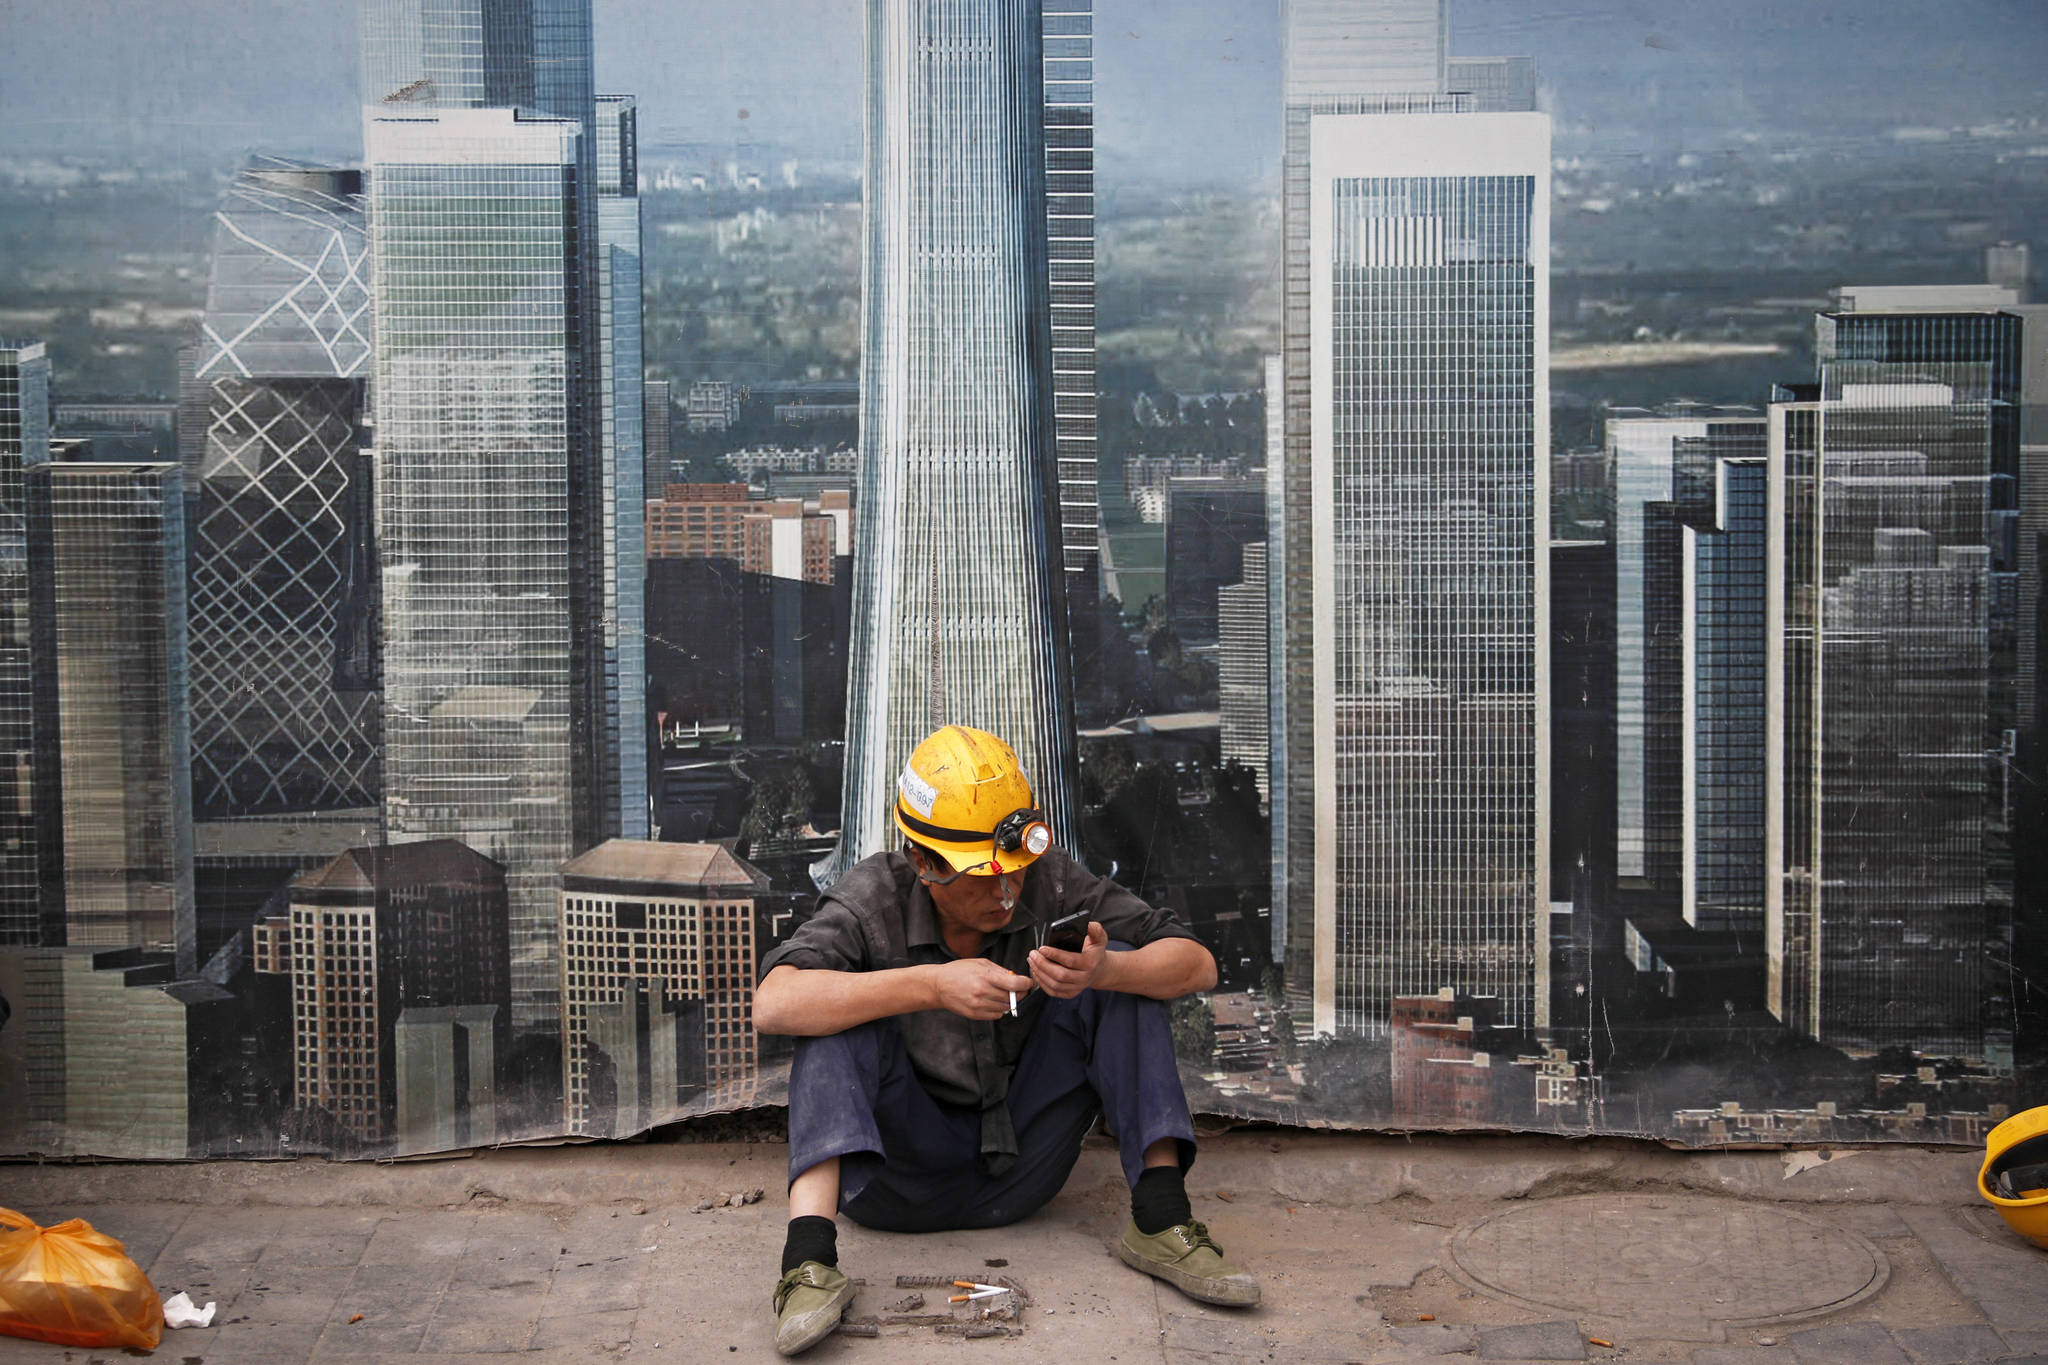 FILE- In this Sept. 19, 2018, file photo a worker browses his smartphone outside a construction site wall depicting the skyscrapers in the Chinese capital at the Central Business District in Beijing. After galloping along for the past two years, the global economy is showing signs of weakening, with the United States, China and Europe all facing the rising threat of a slowdown. Few economists foresee an outright global recession within the next year. But the synchronized growth that powered most major economies since 2017 appears to be fading. (AP Photo/Andy Wong, File)